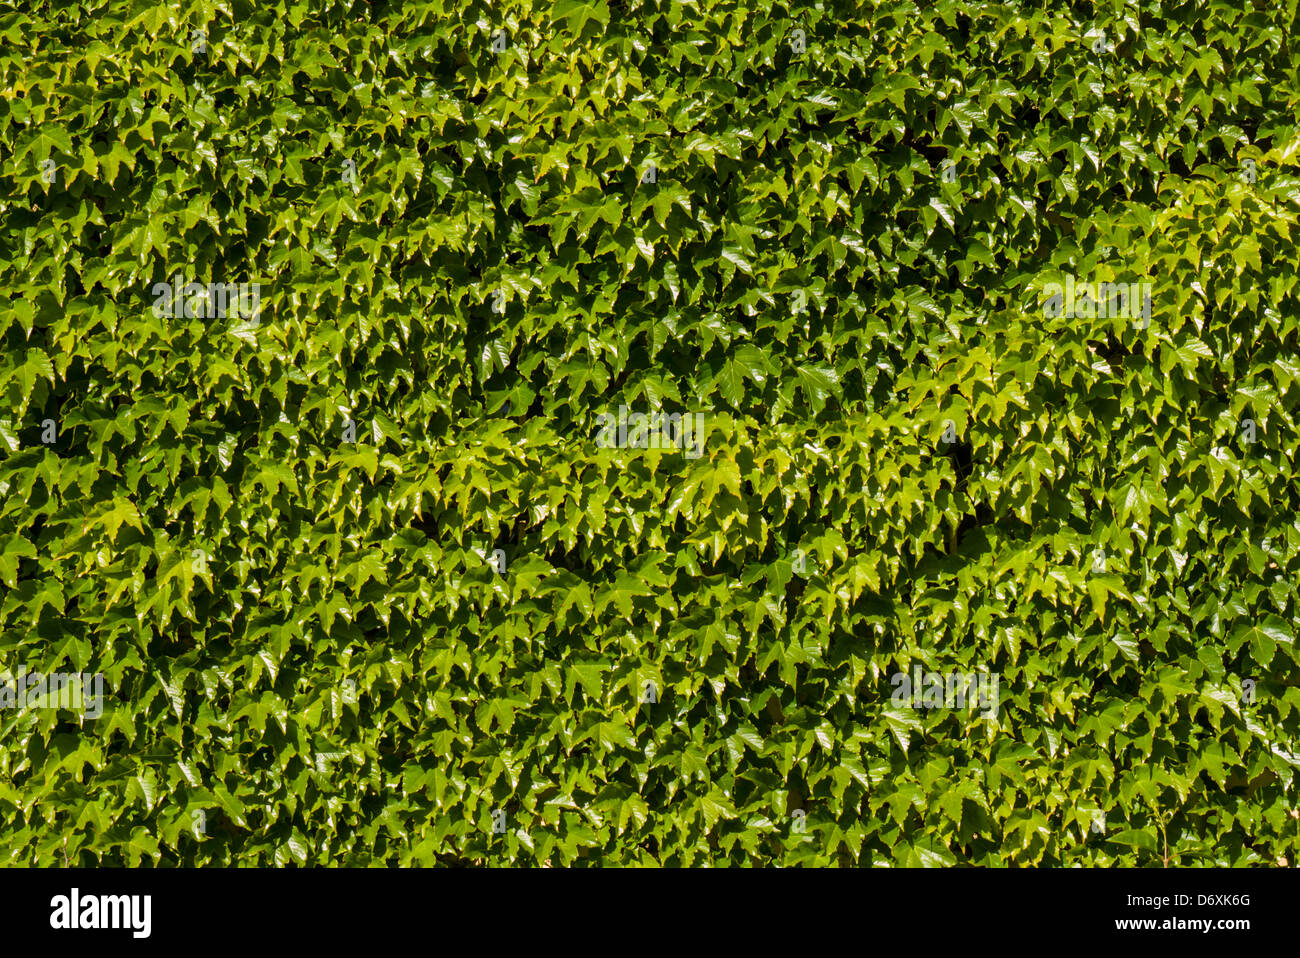 ivy, wall of leaves Stock Photo